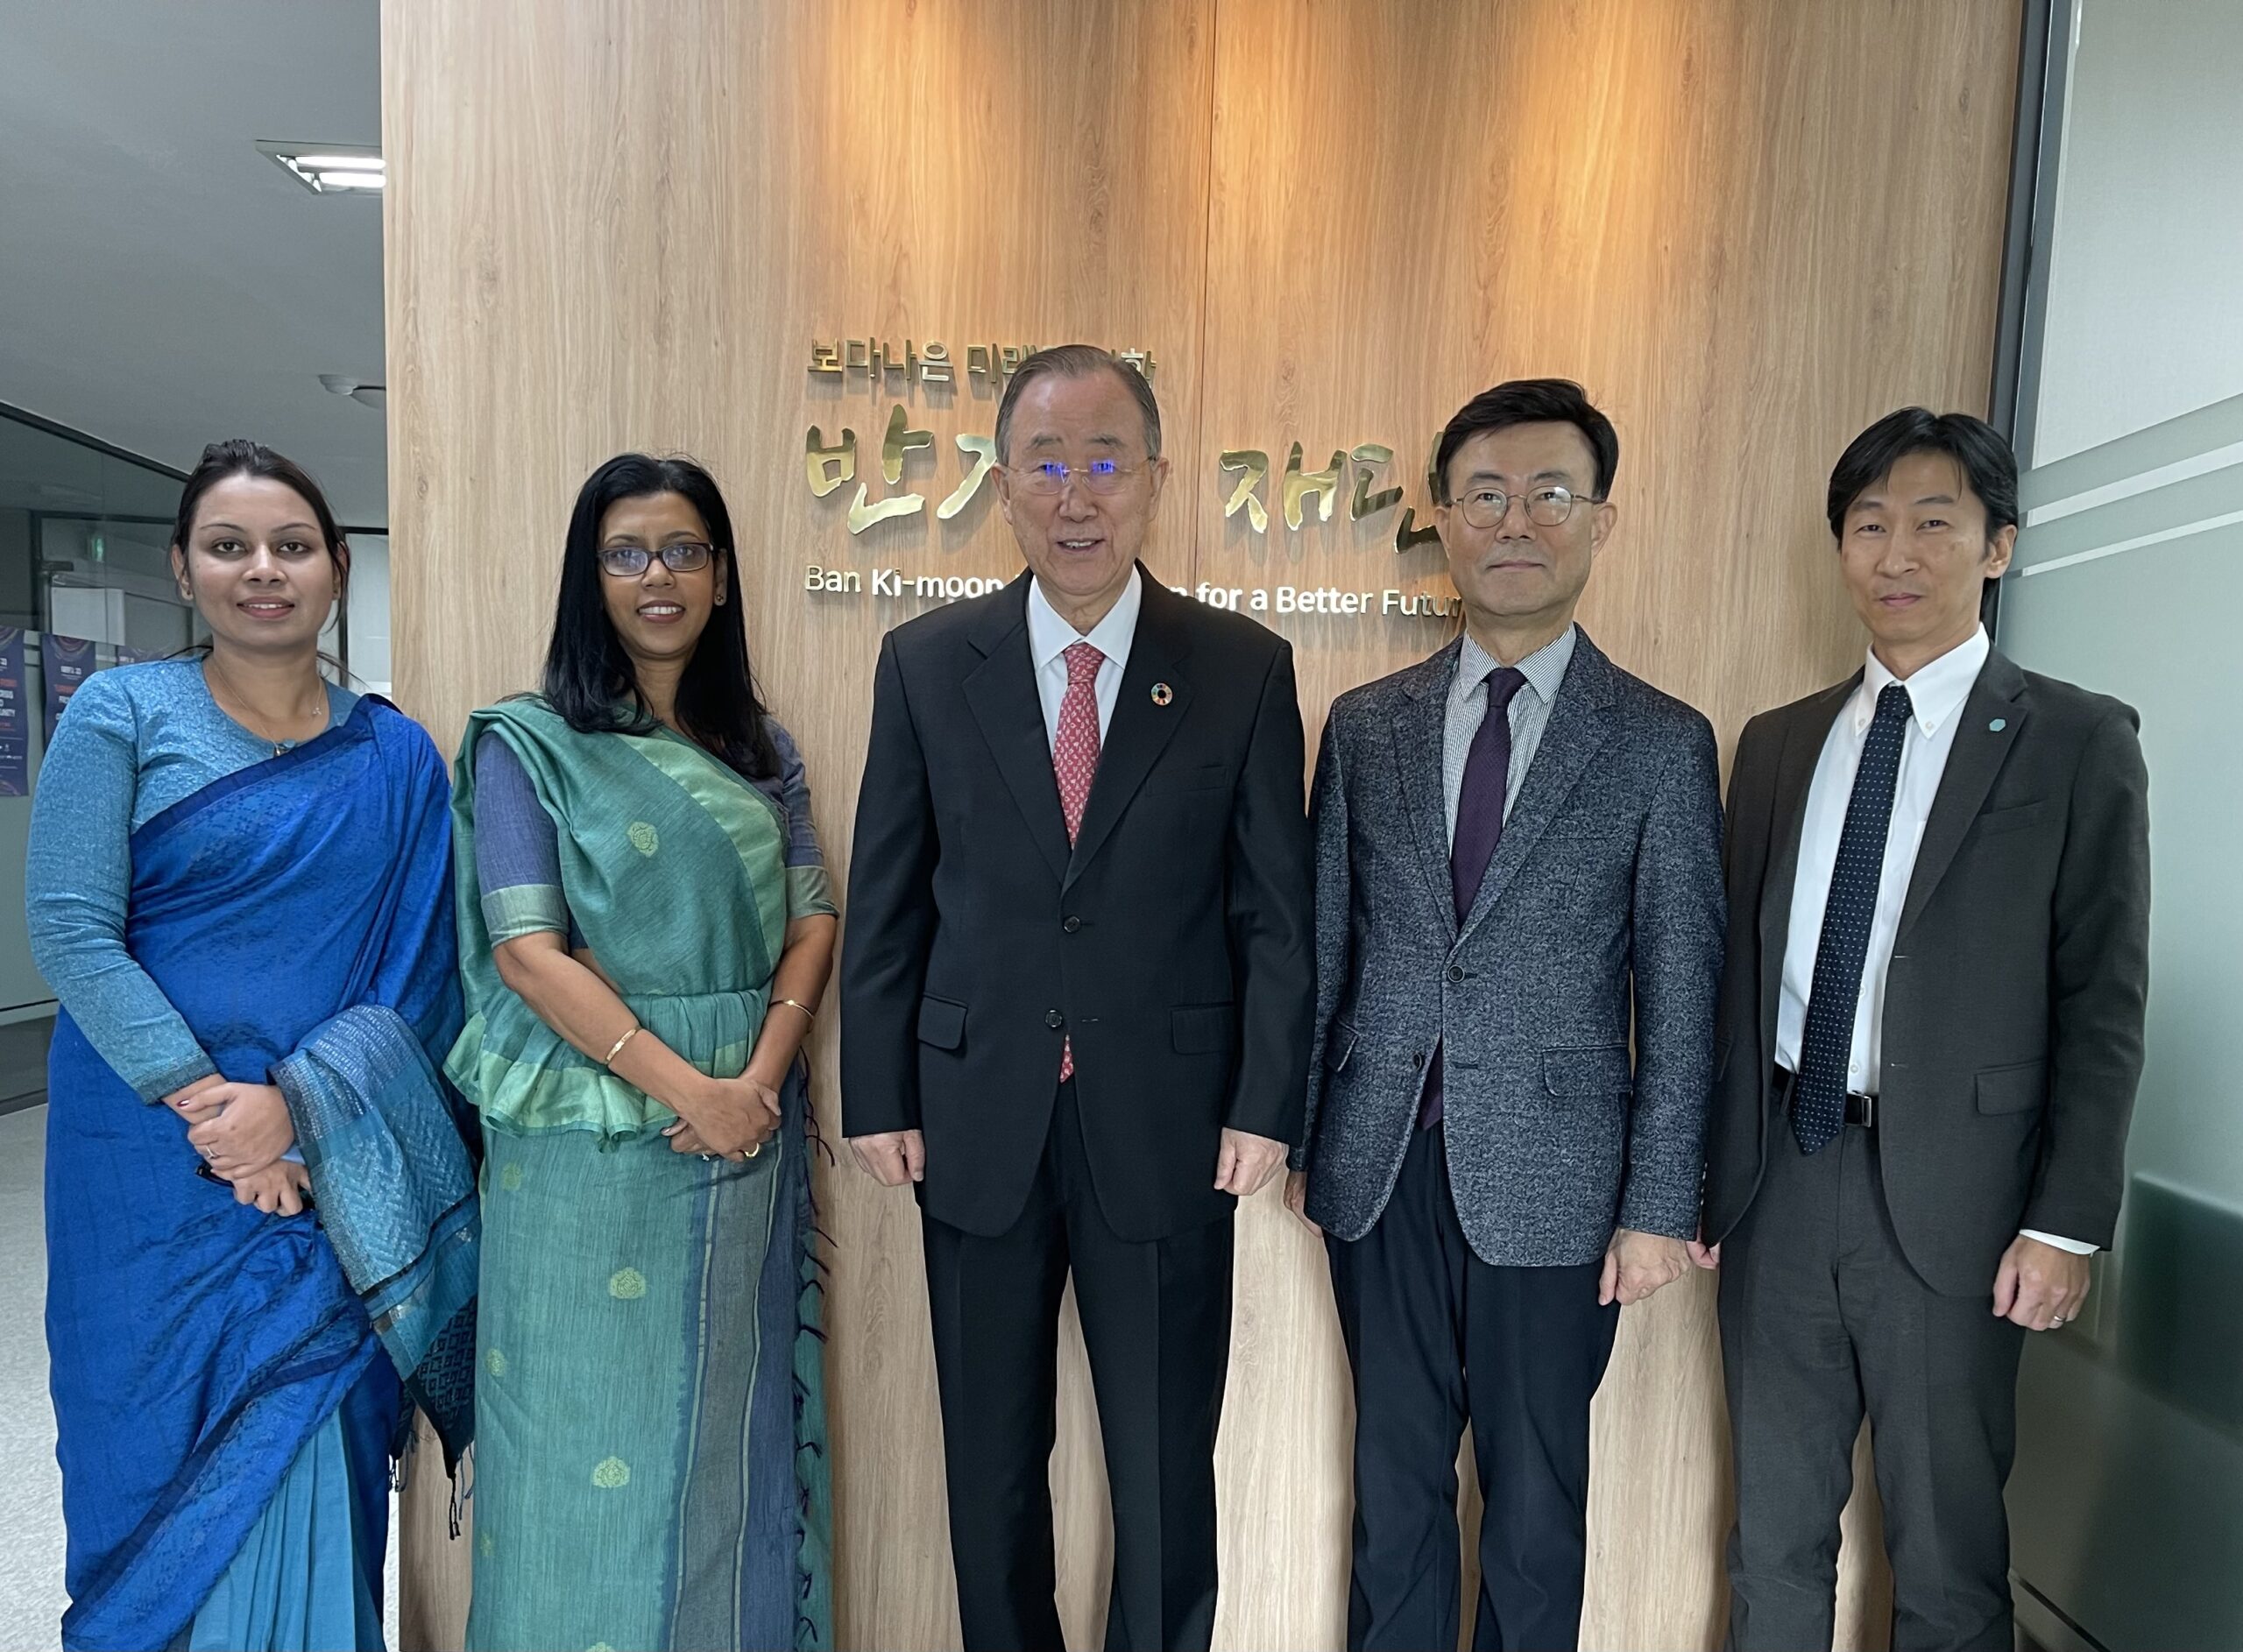 Ban ki-Moon, former UN Secretary General and Chair of the Global Green Growth Institute discusses cooperation with Sri Lanka’s Ambassador to Korea